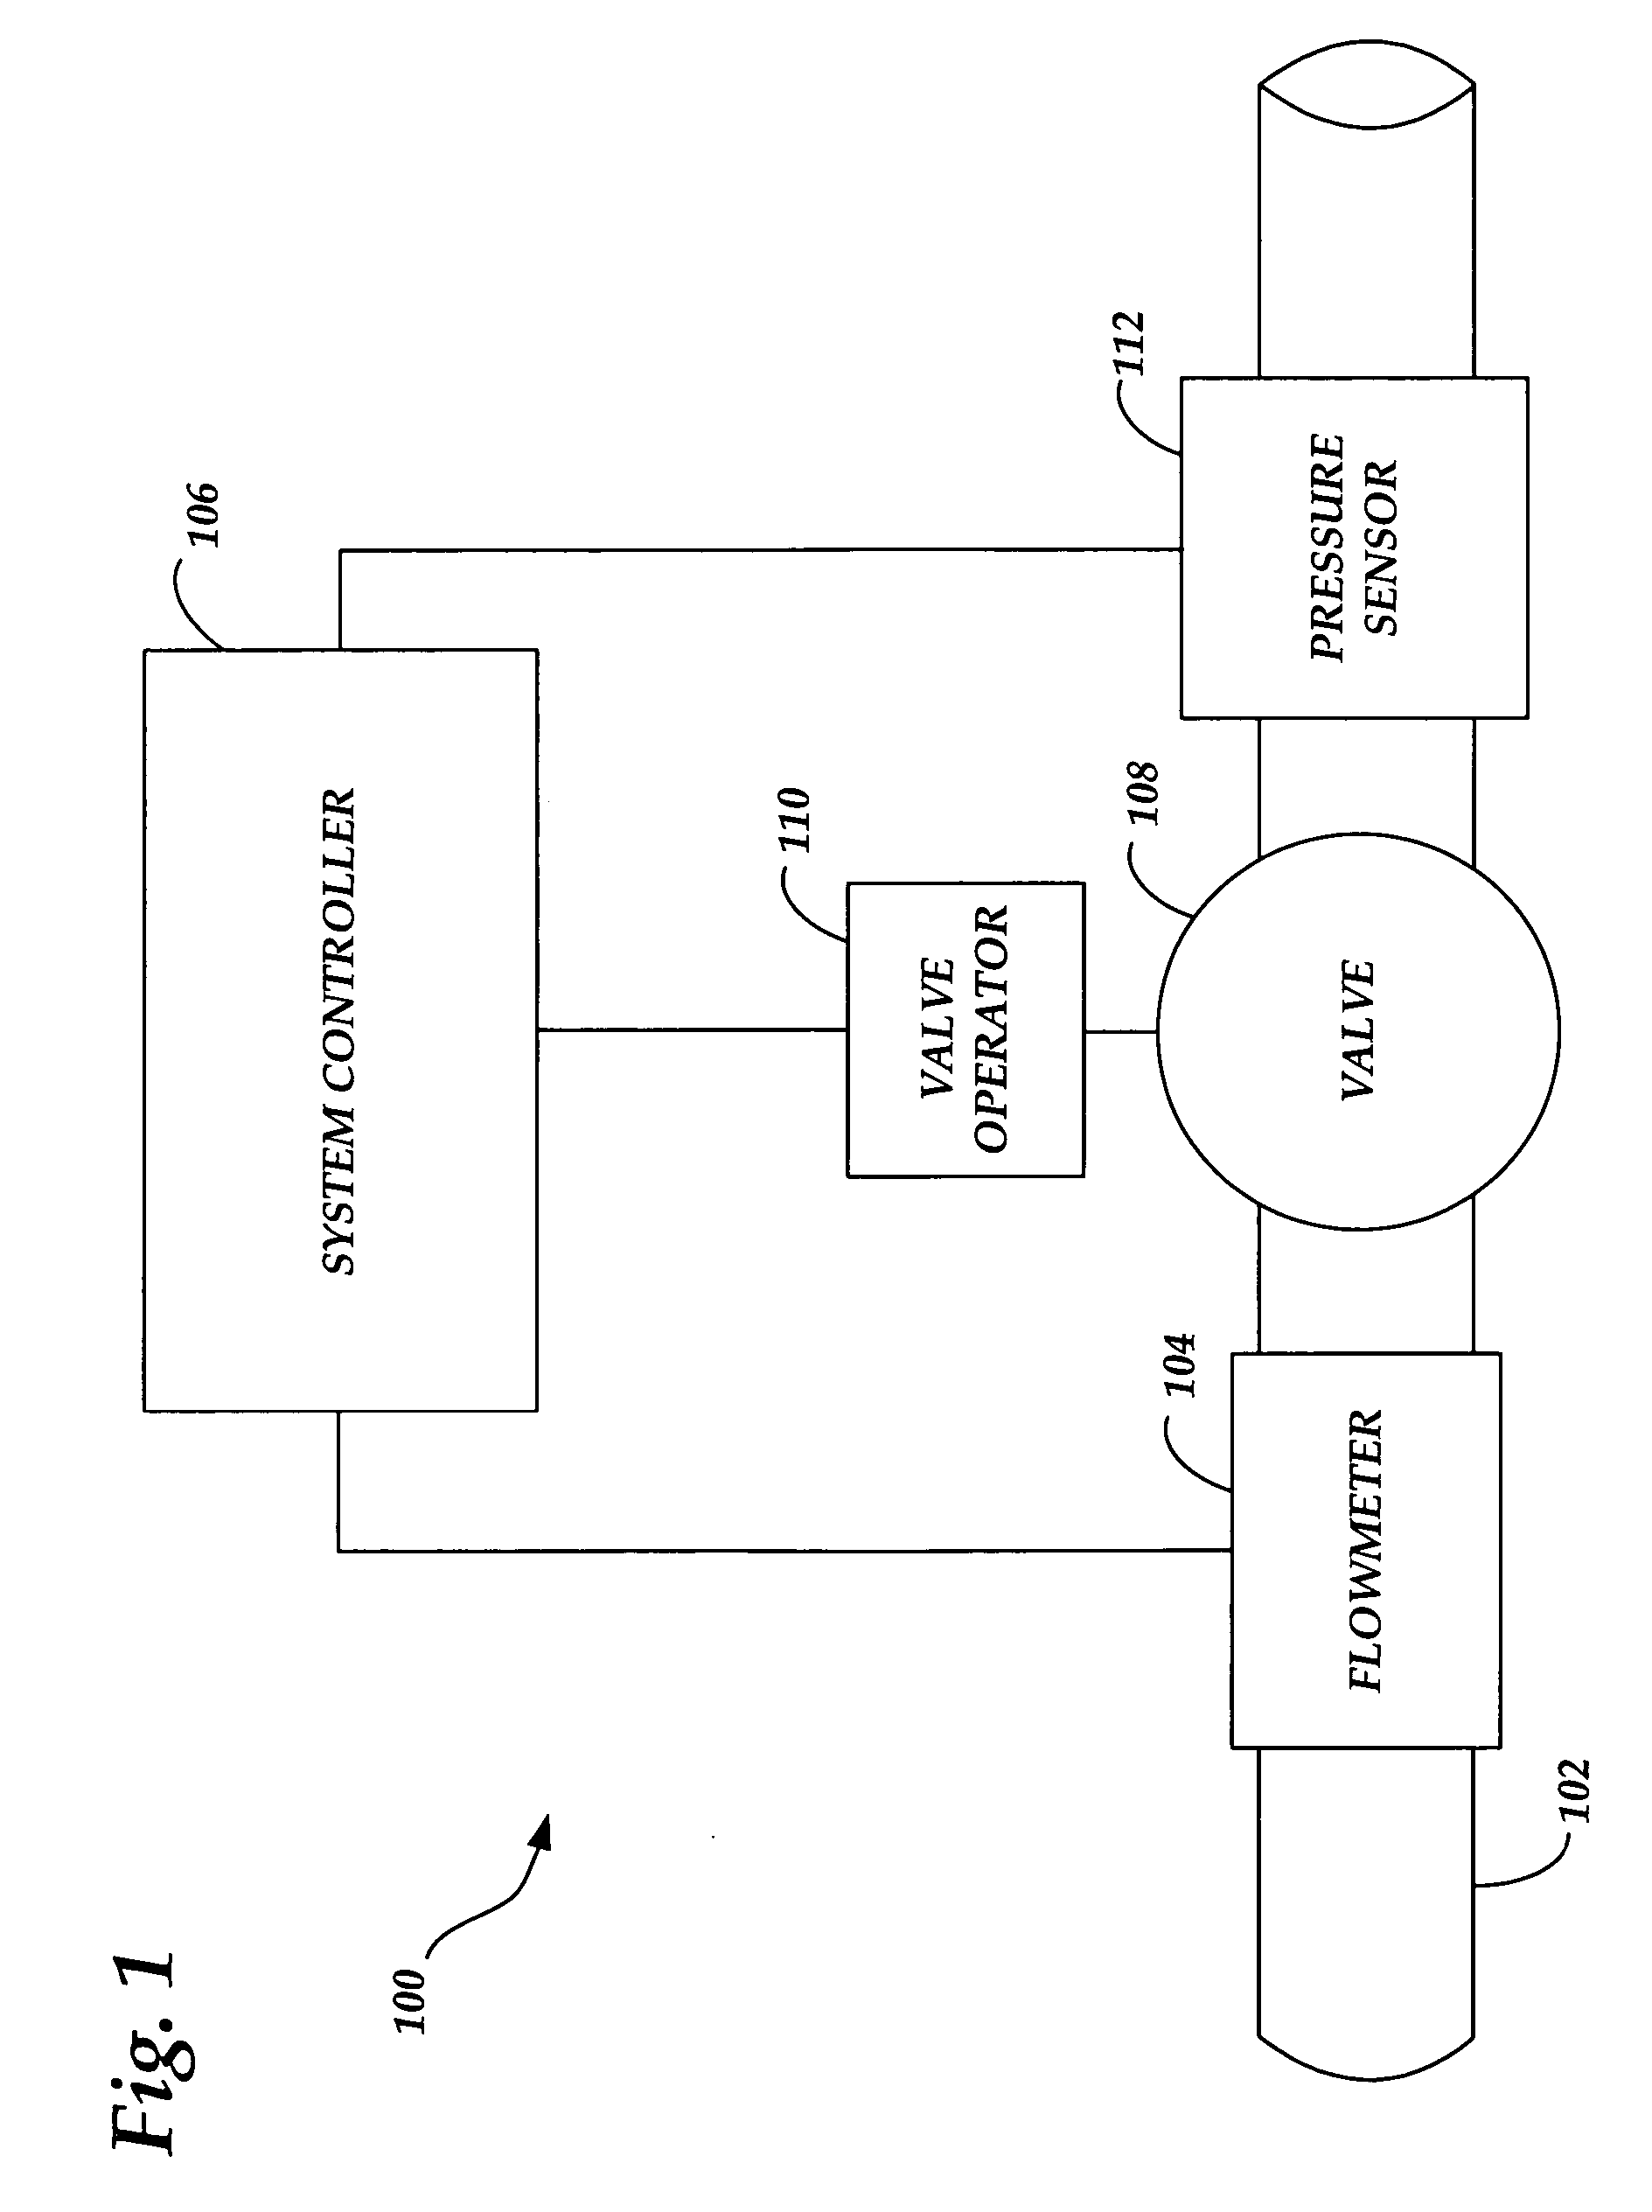 Systems and methods for detecting and preventing fluid leaks